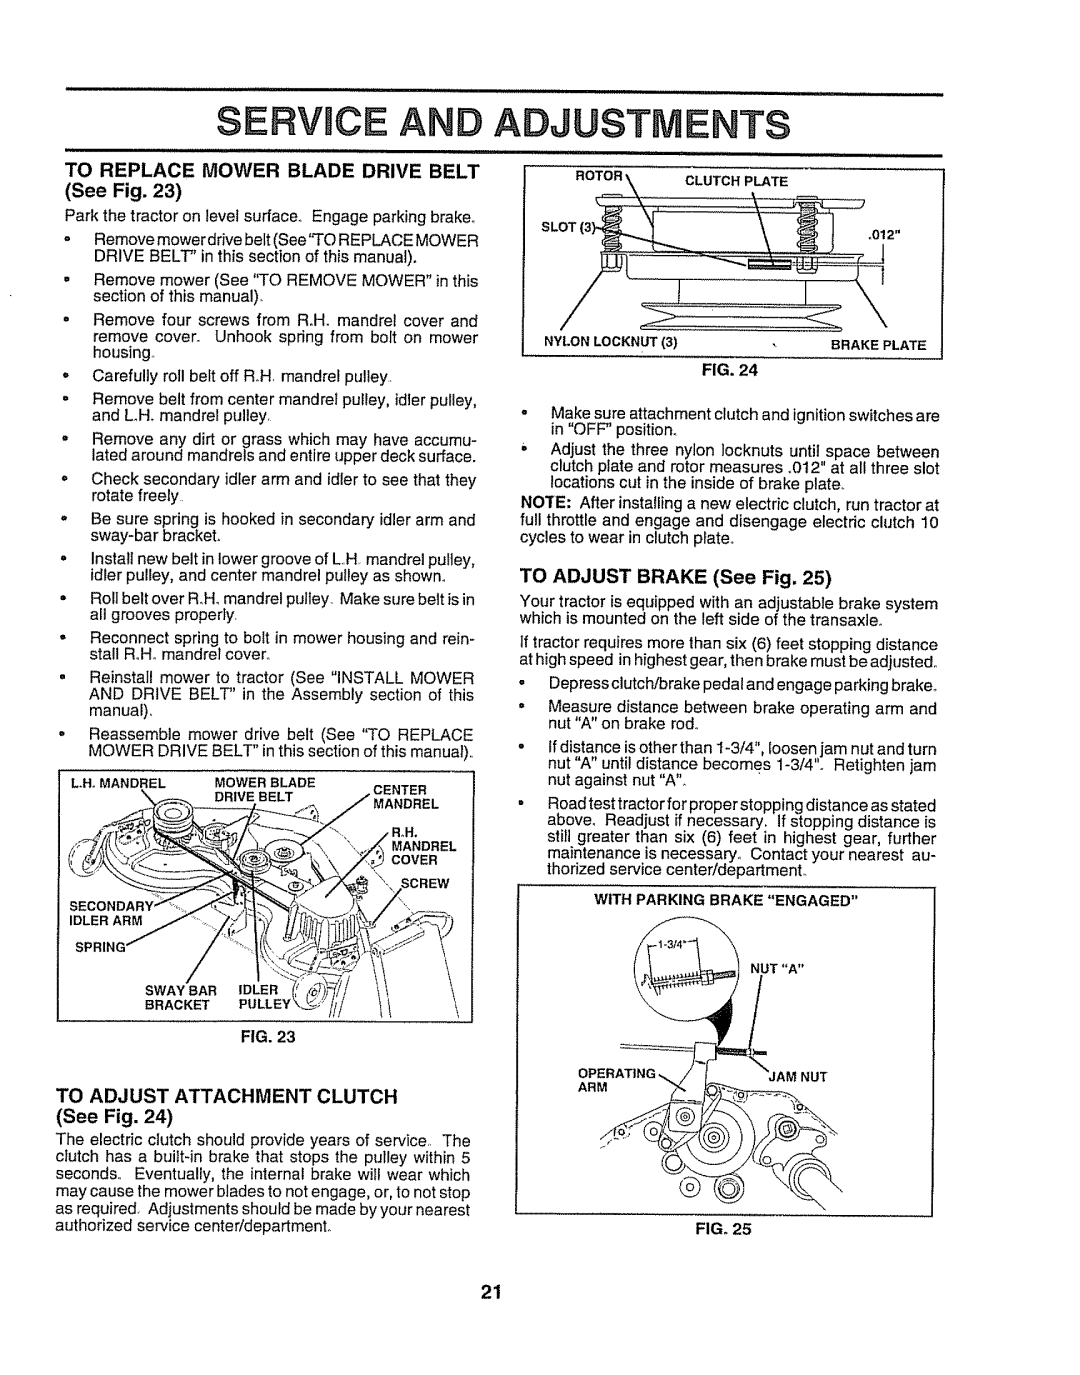 Craftsman 917O251550 SERVmCE AND ADJUSTMENTS, TO REPLACE MOWER BLADE DRIVE BELT See Fig, TO ADJUST BRAKE See Fig 